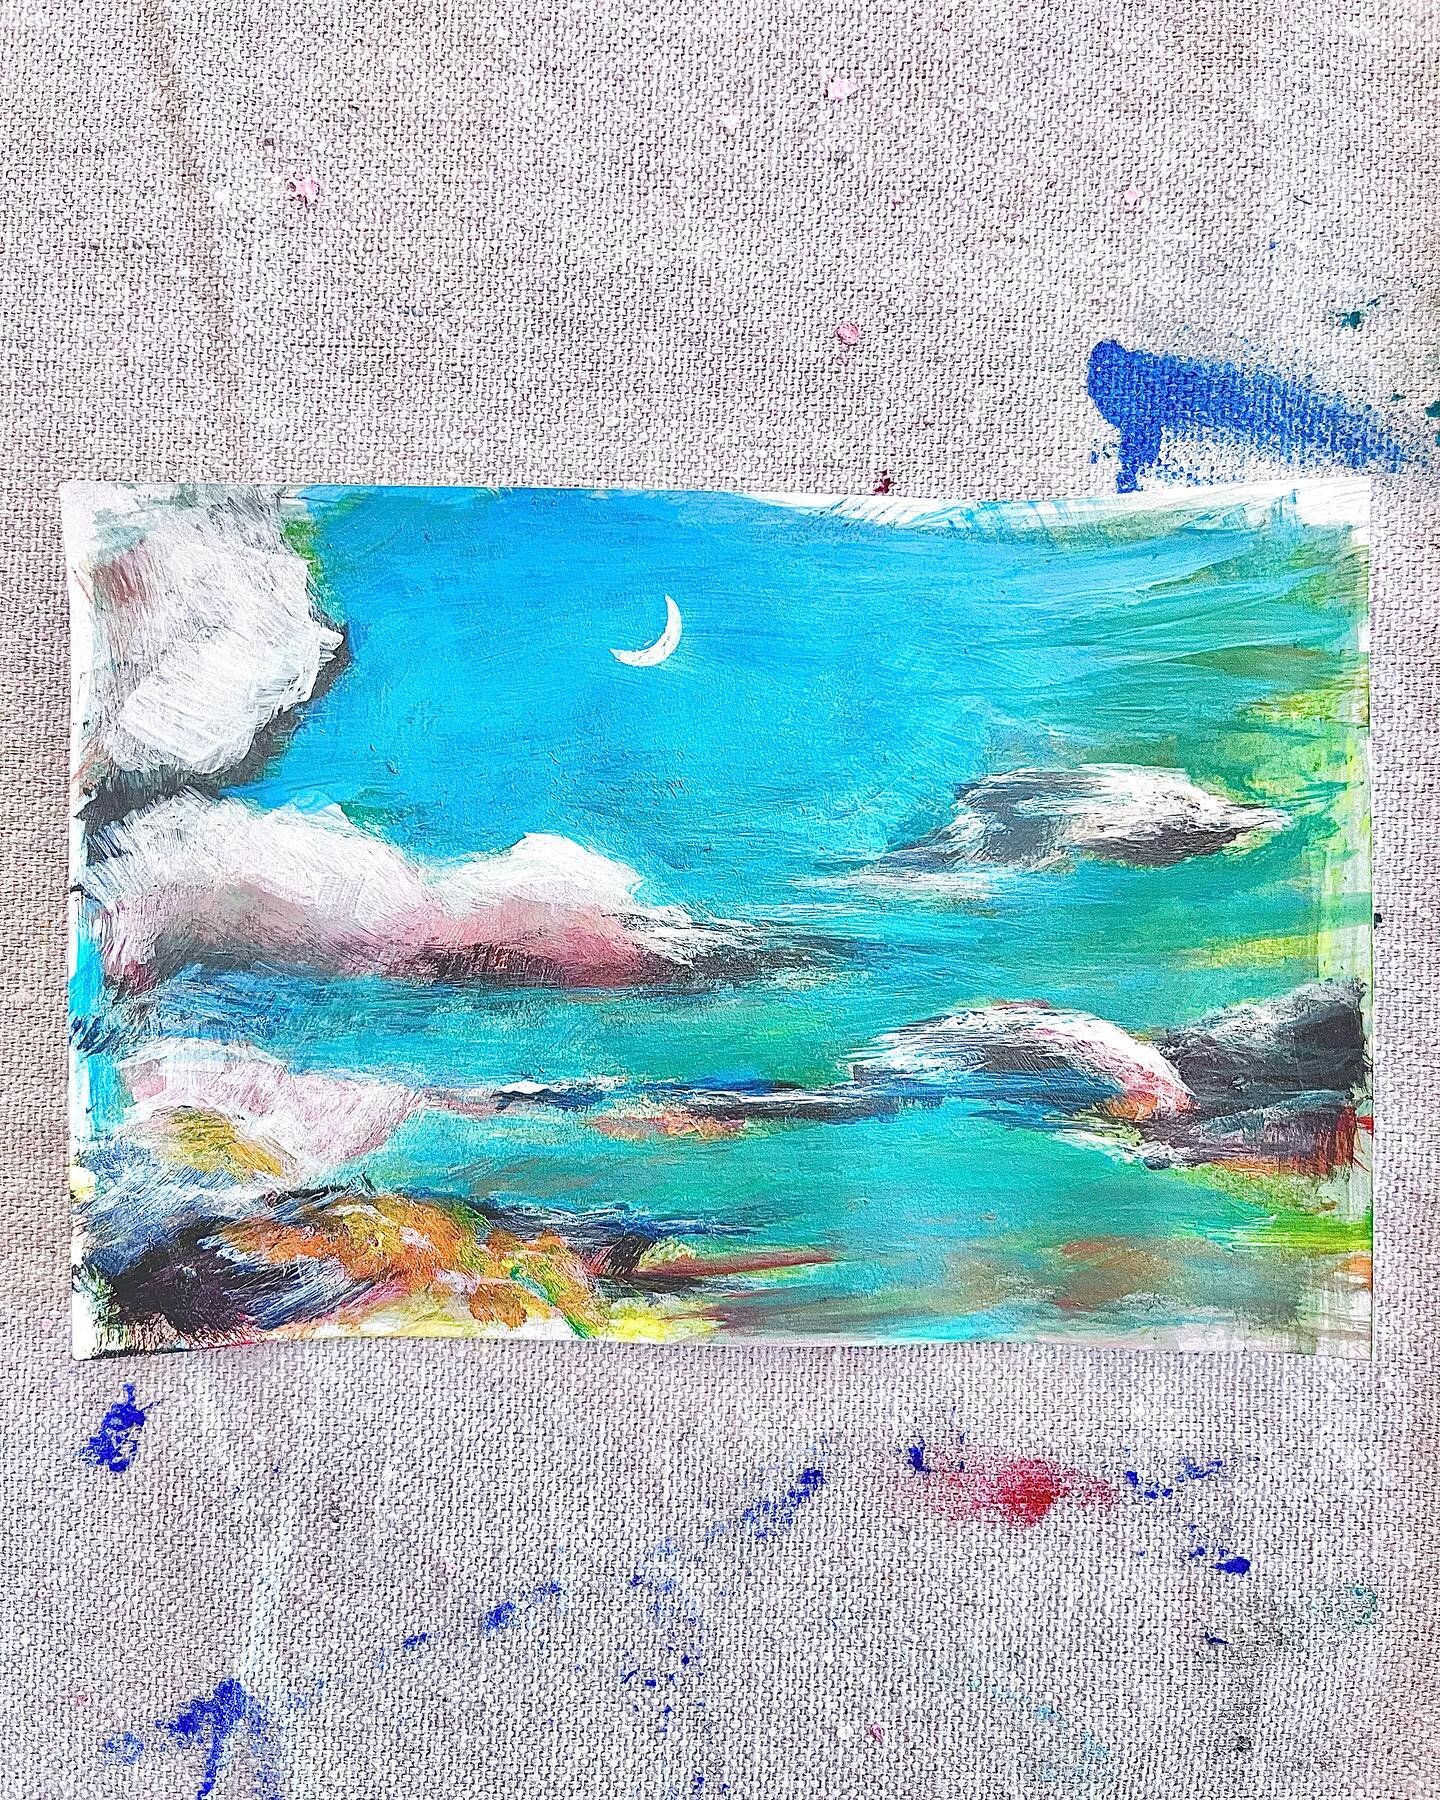 Moon, I win. 4x6&rdquo; 

Postcard from Anywhere.
As a project for my art class, we made homemade postcards. The objective of the lesson was to write a postcard to yourself or a loved one and illustrate it however you&rsquo;d like. We also talked abo